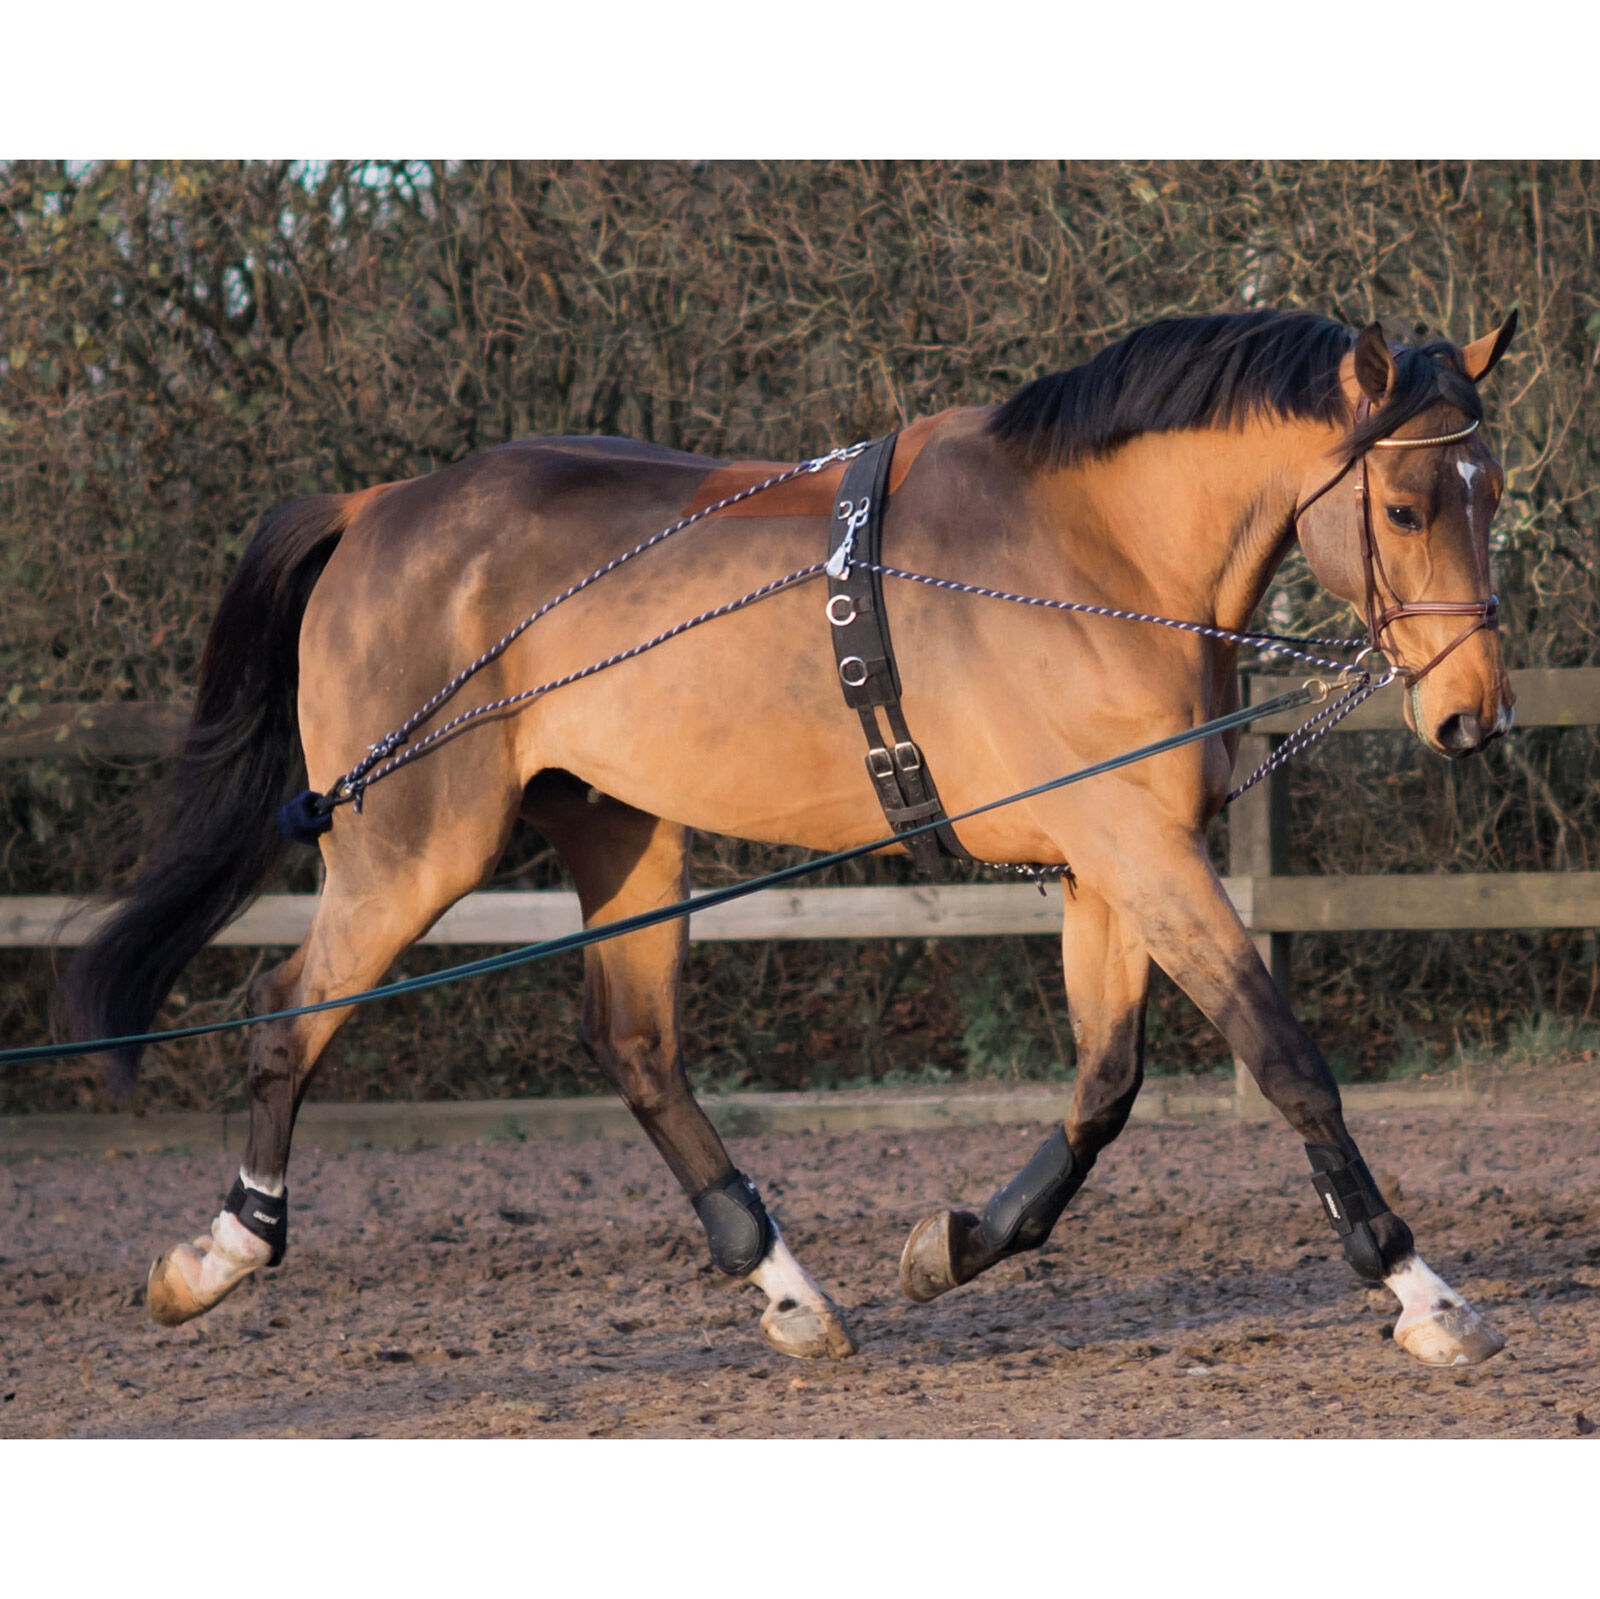 NEW Horse Lunging Training Aids PESSOA based Navy Blue one size fits all £24.99 